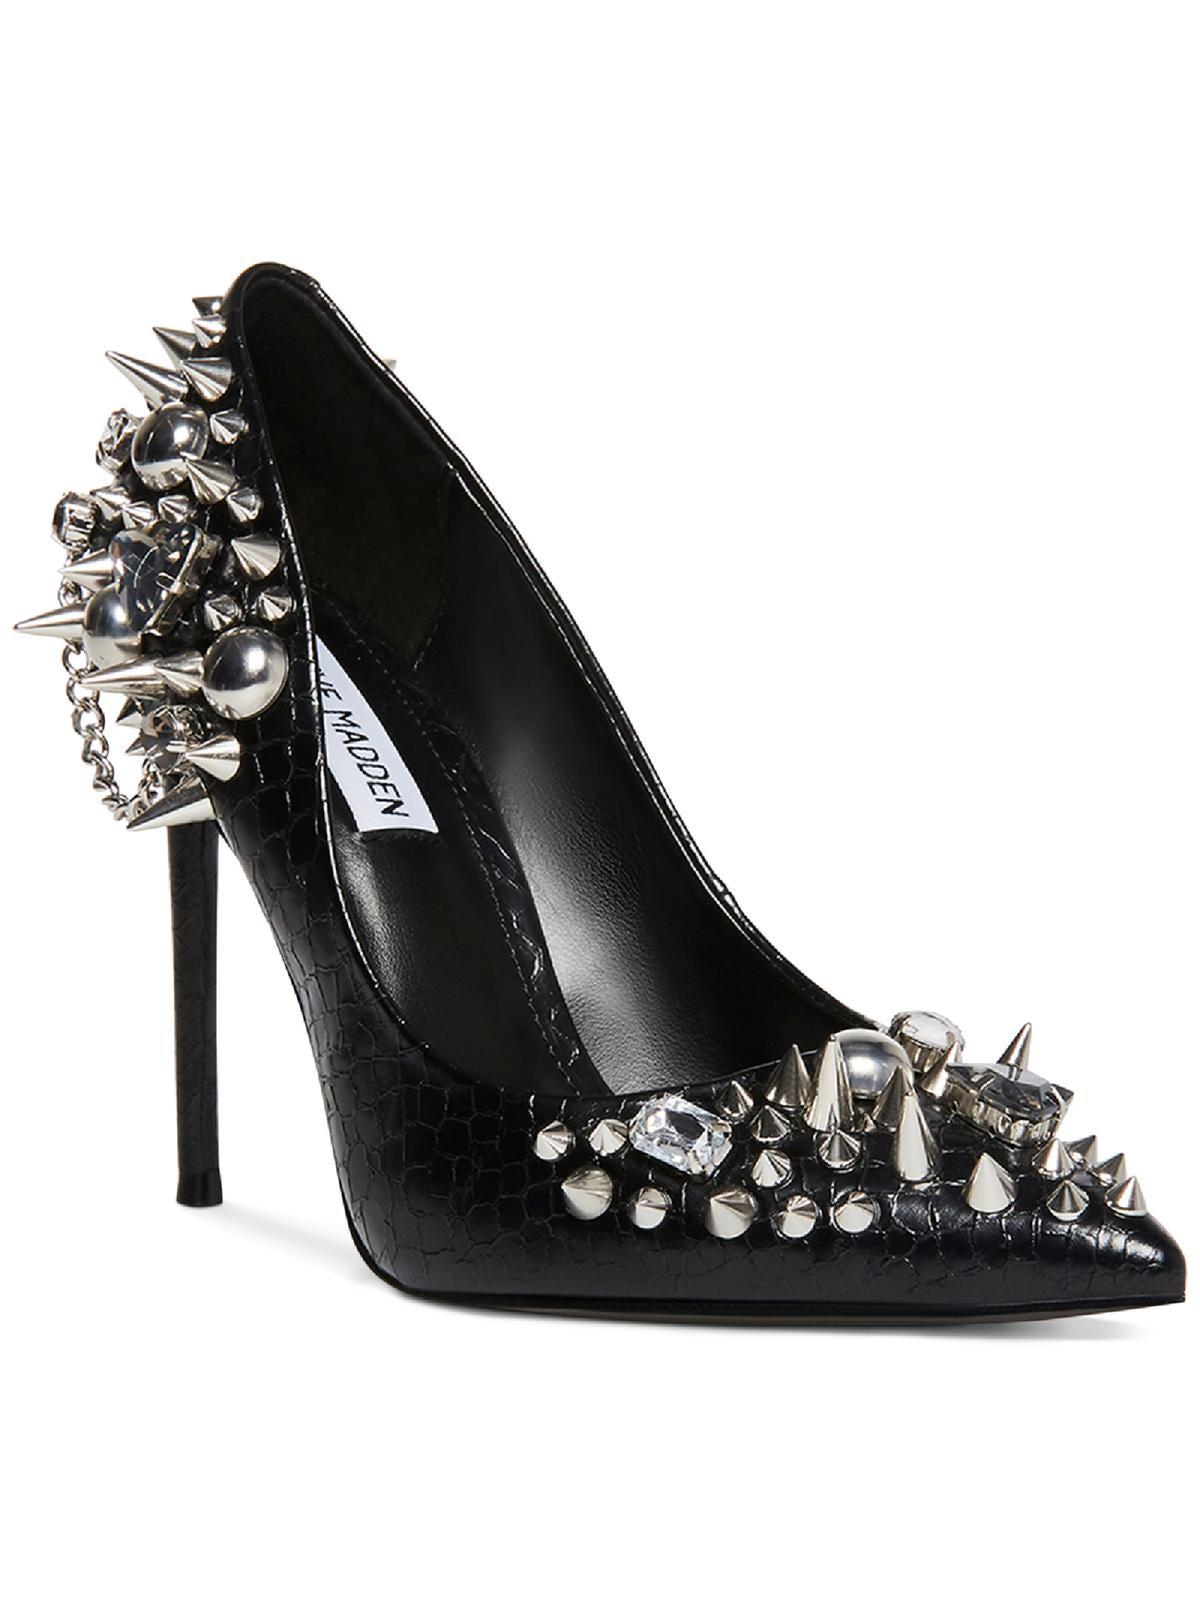 Steve Madden Veronicka Faux Leathter Studded Pumps in Black | Lyst